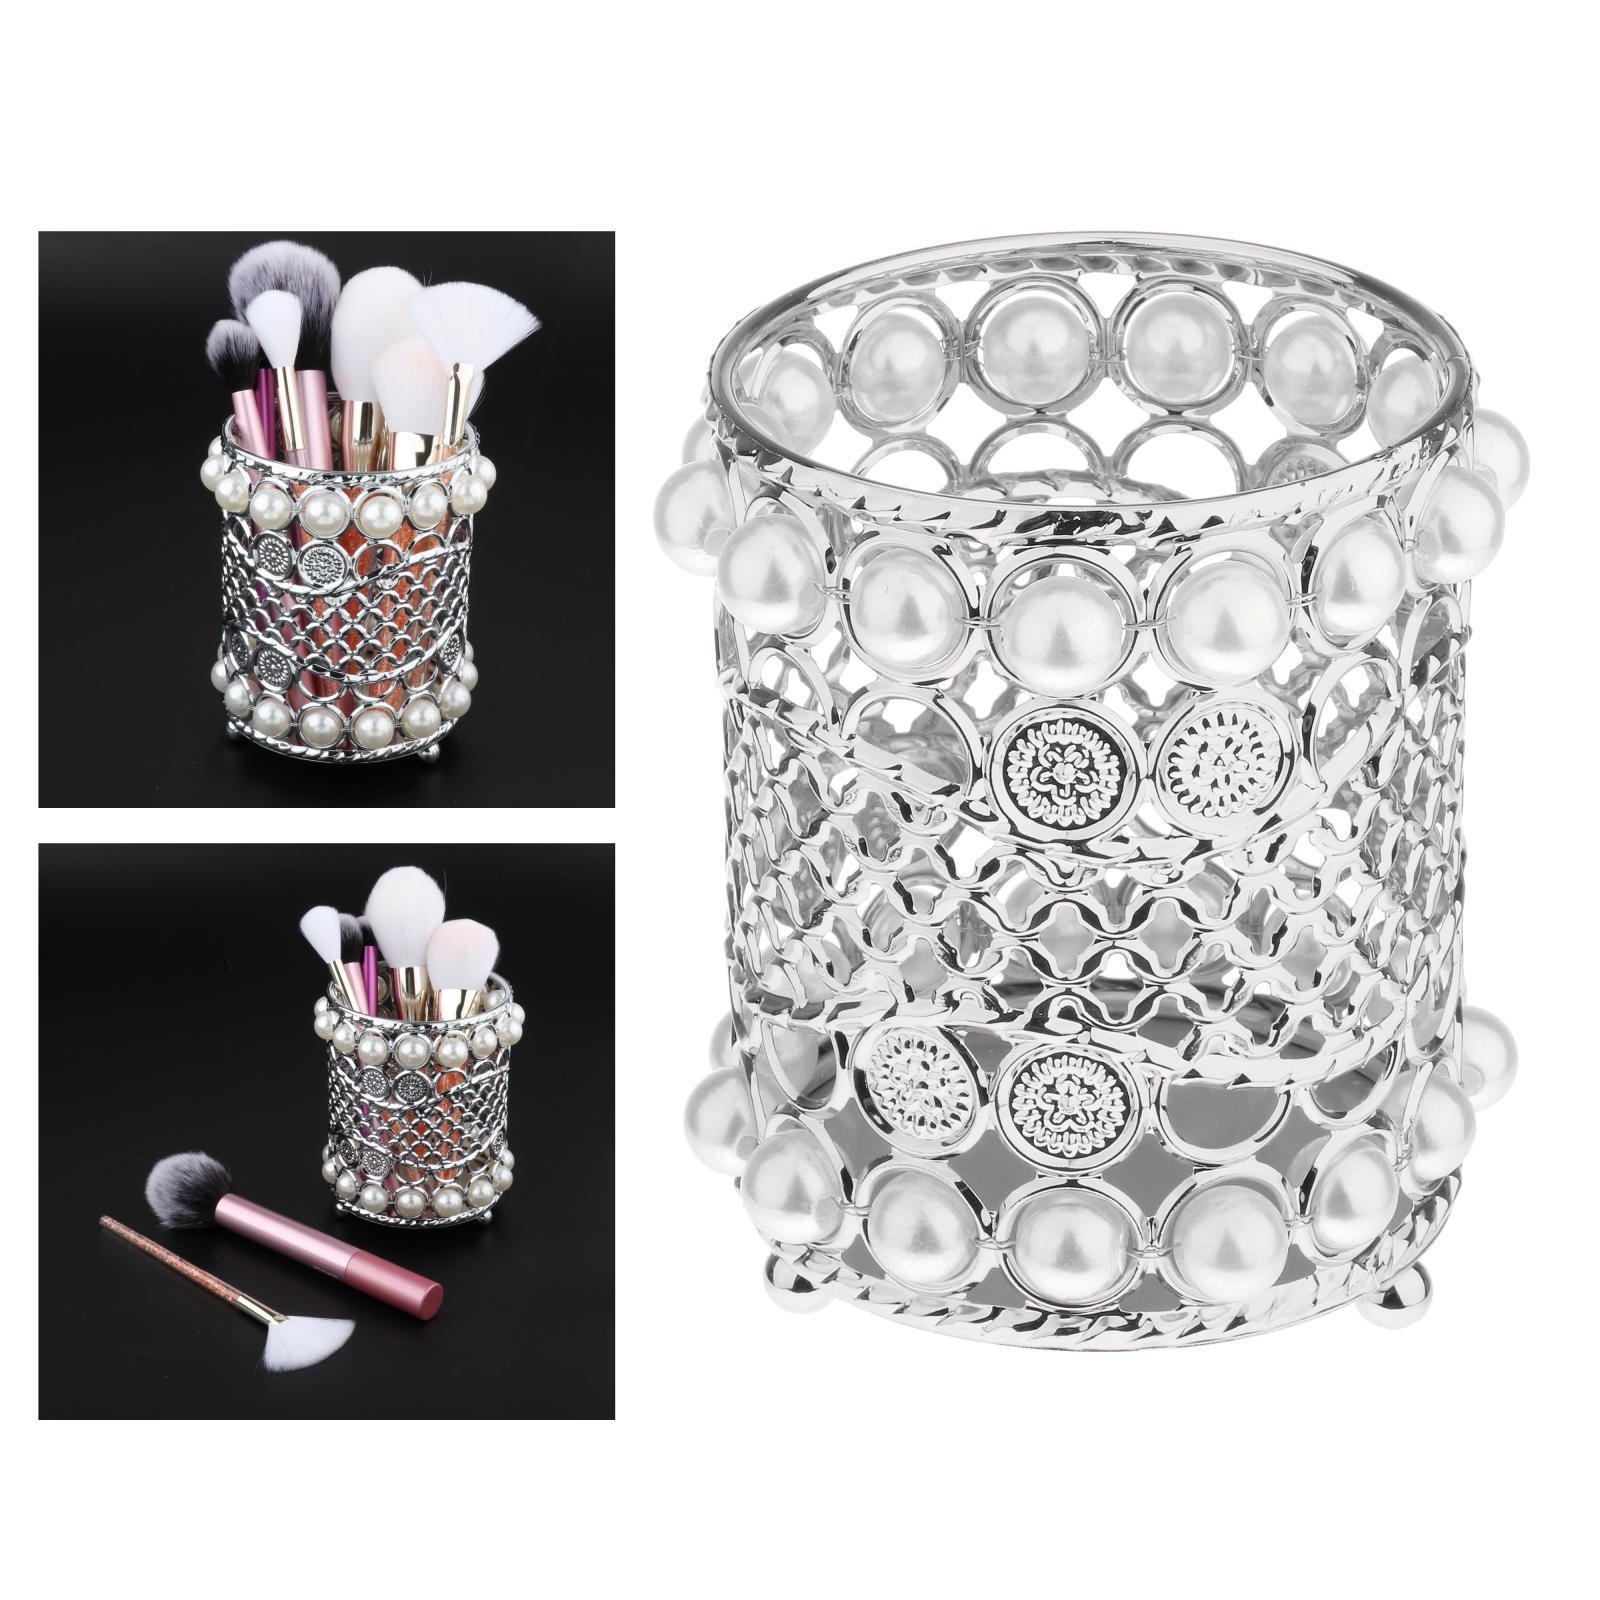 2x Household Makeup Brush Holder Cup Cosmetic Jewelry Organizer Vanity Decor